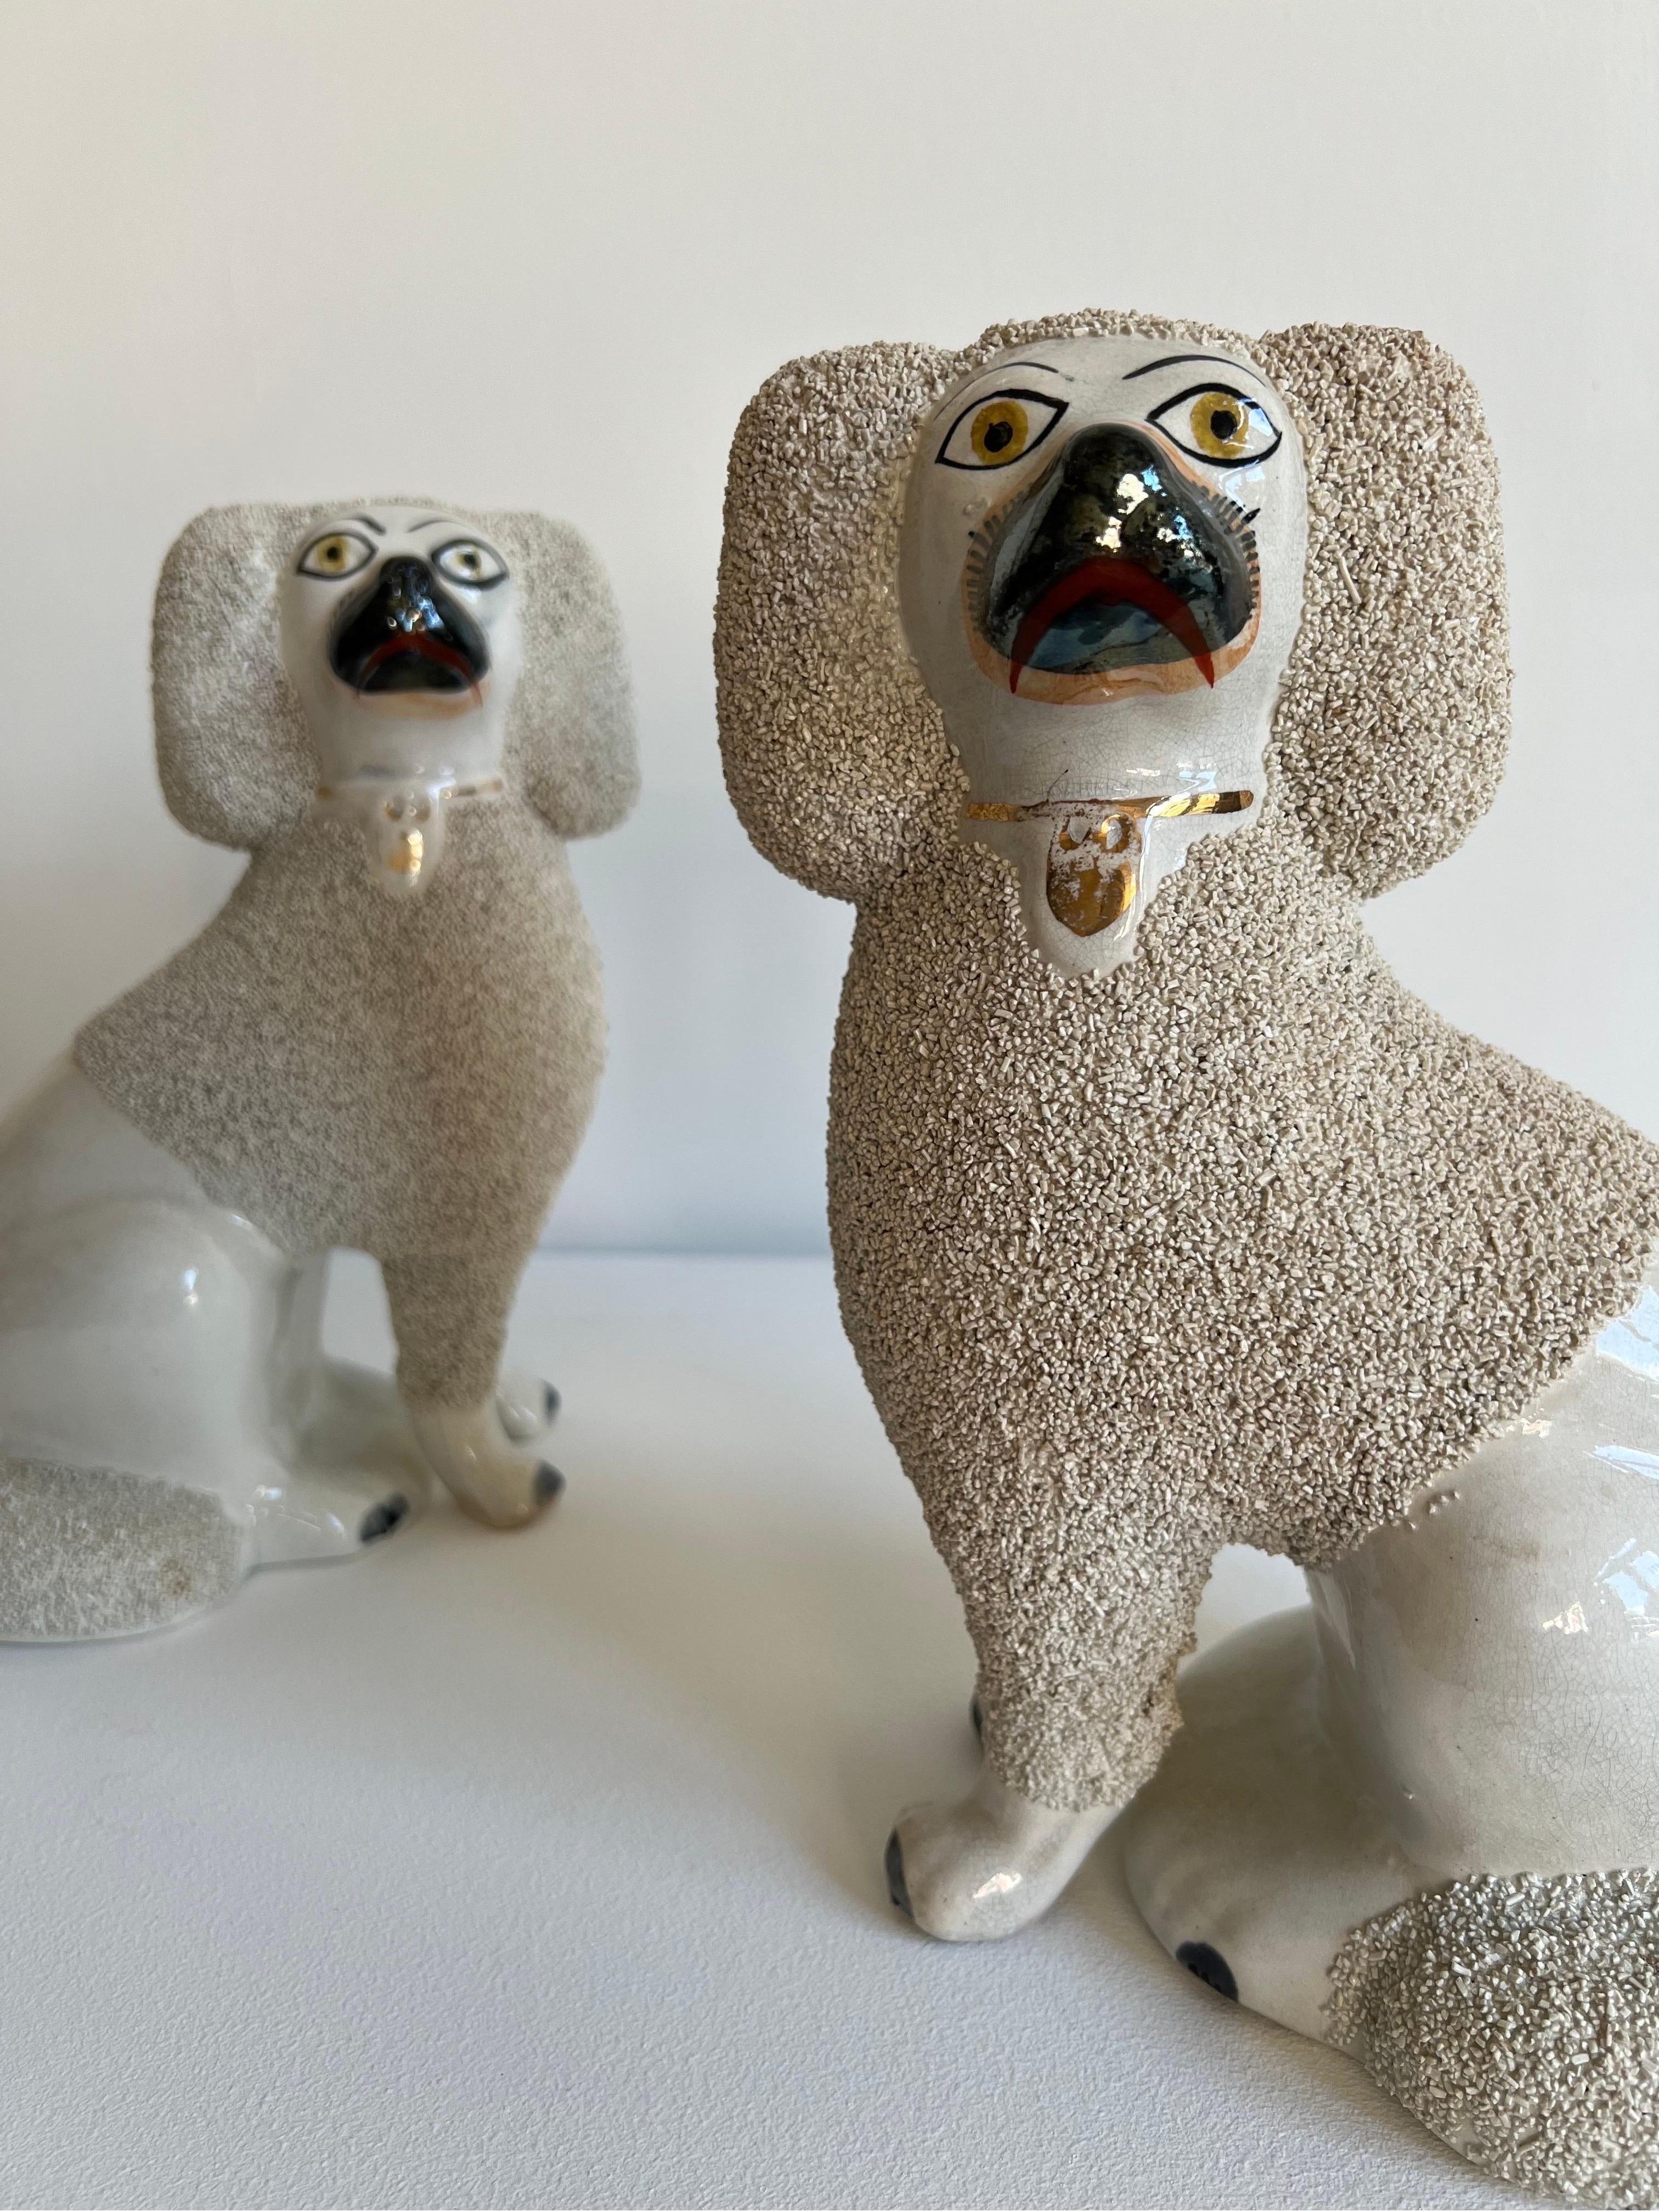 A superb pair of of 19th Century antique Staffordshire Poodles with chip-glazed coats, applied by hand, and separately moulded front legs. Both wear gilded collars and have hand painted faces and paws.

In great condition for their age.

H: 24cm x